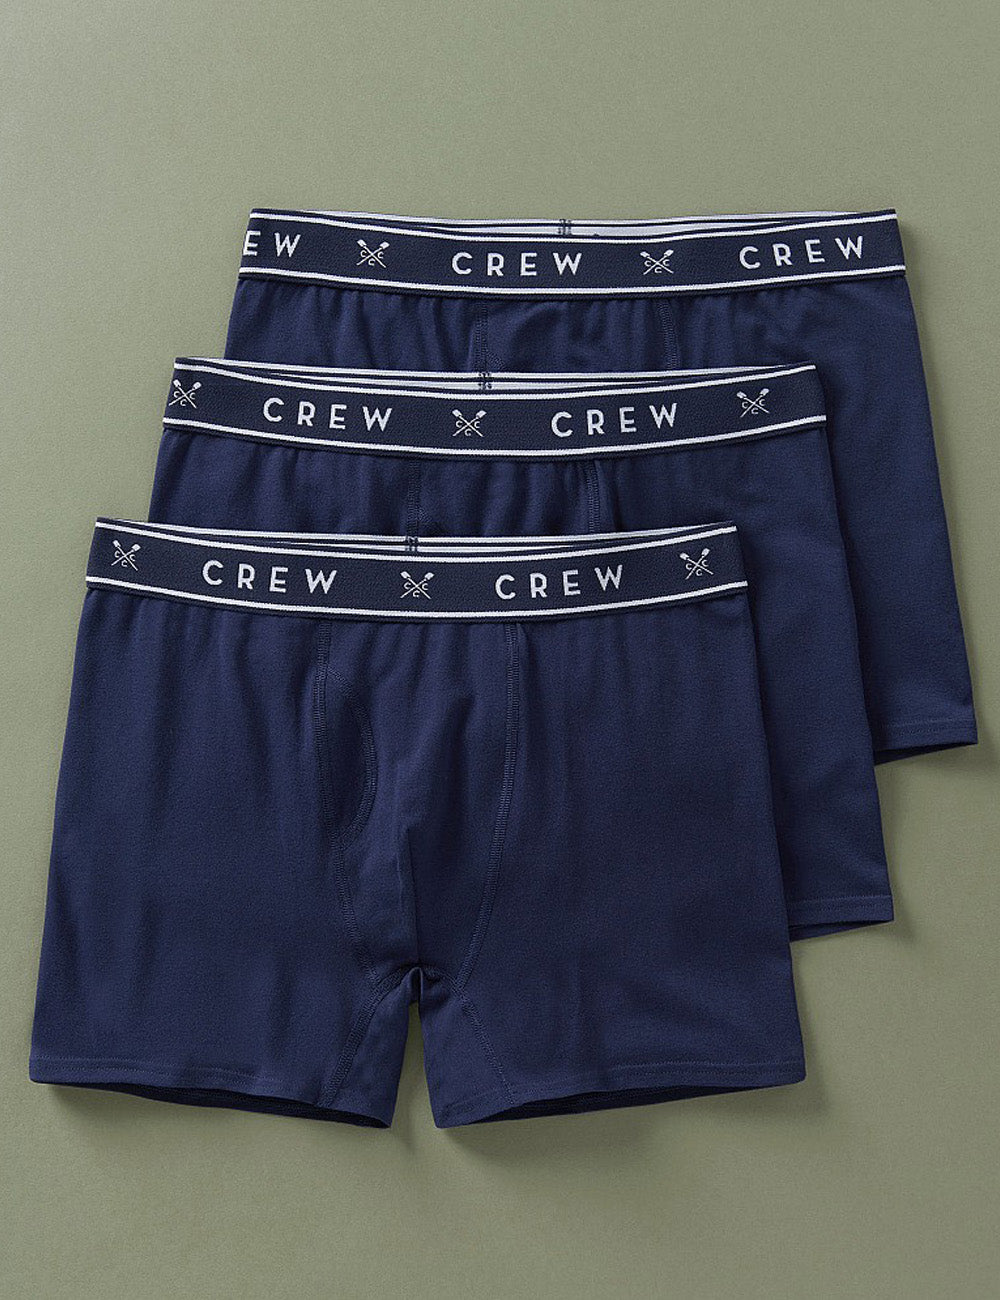 Crew Clothing's Jersey Boxers on a green background